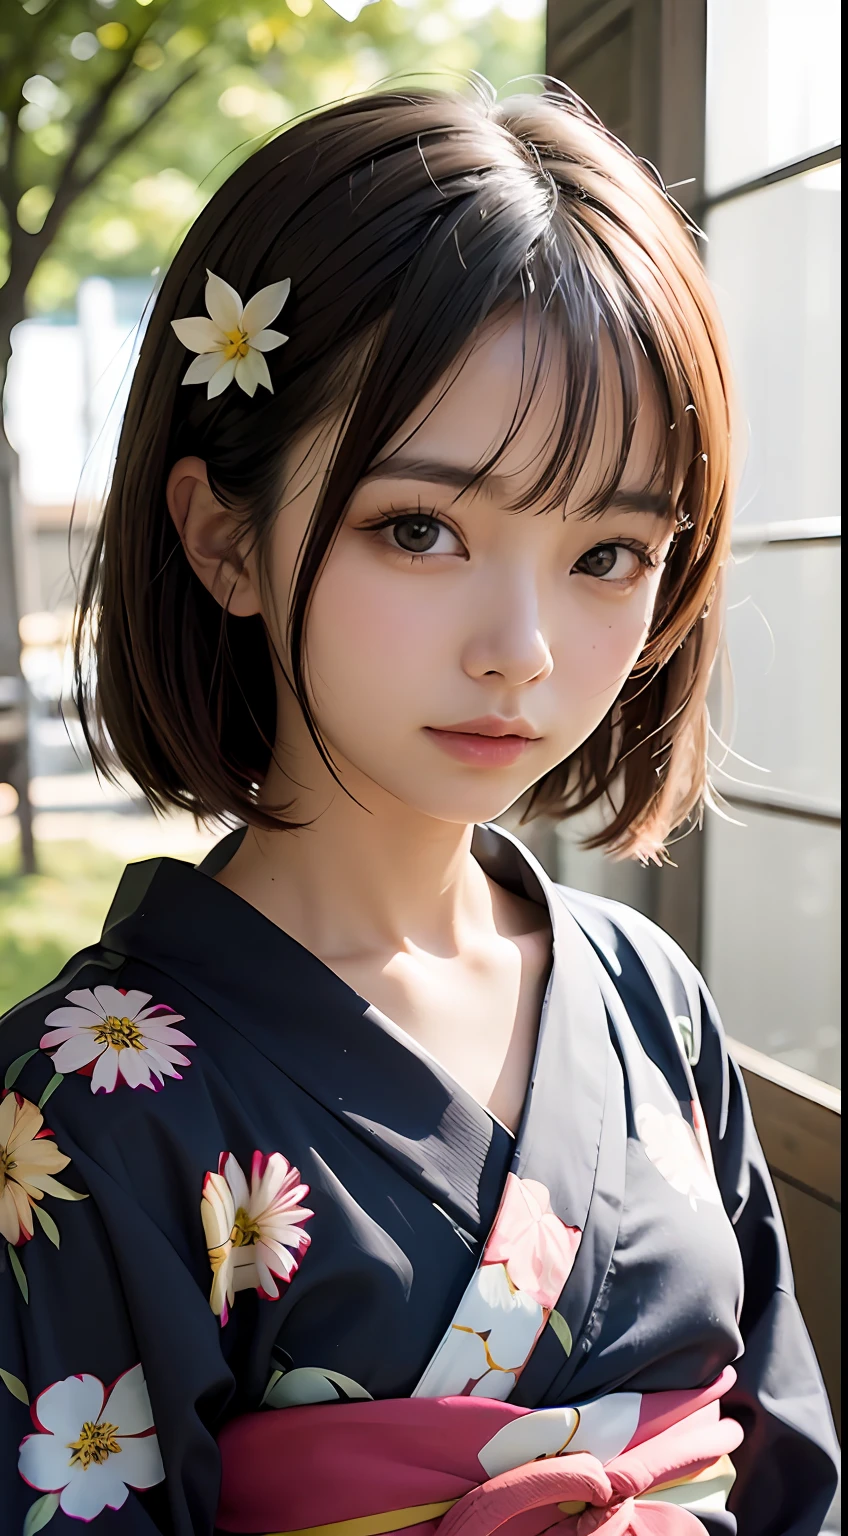 (masutepiece, Best Quality:1.4), Beautiful face, 8K, 85 mm, absurderes, (floral pattern yukata:1.4), close up of face, violaceaess, gardeniass, Delicate girl, Solo, Night, Looking at Viewer, Upper body, Film grain, chromatic abberation, Sharp Focus, face lights, Professional Lighting, Sophisticated, (Smile:0.4), (Simple background, Bokeh background:1.2), Detail Face